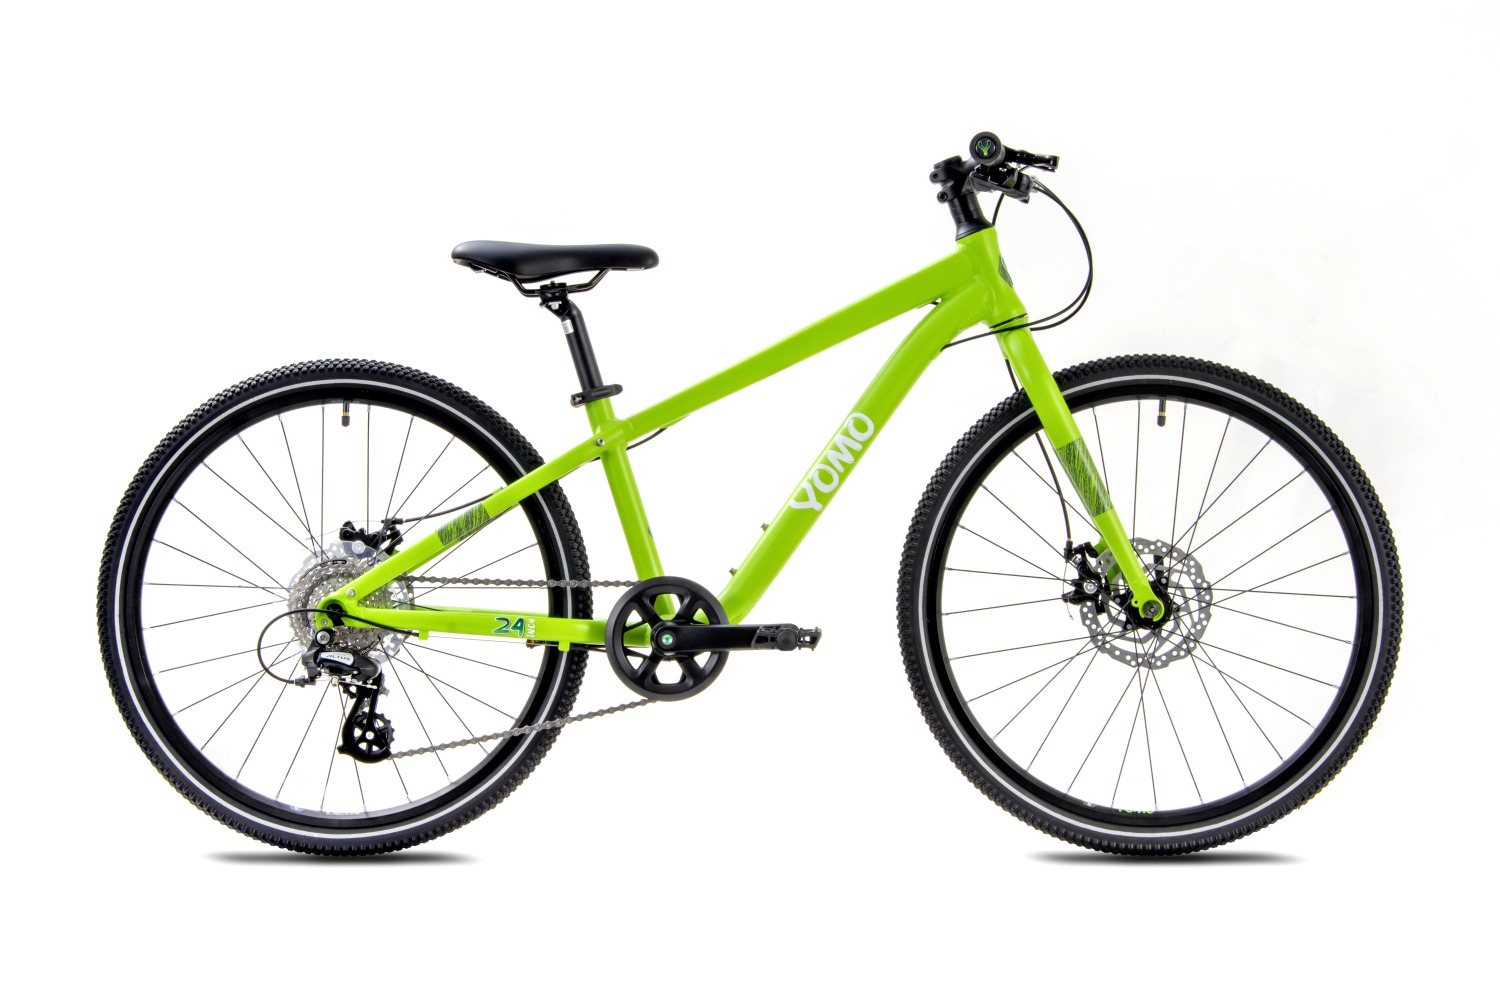 YOMO 24 kid bike with hydraulic disc brakes in green colour